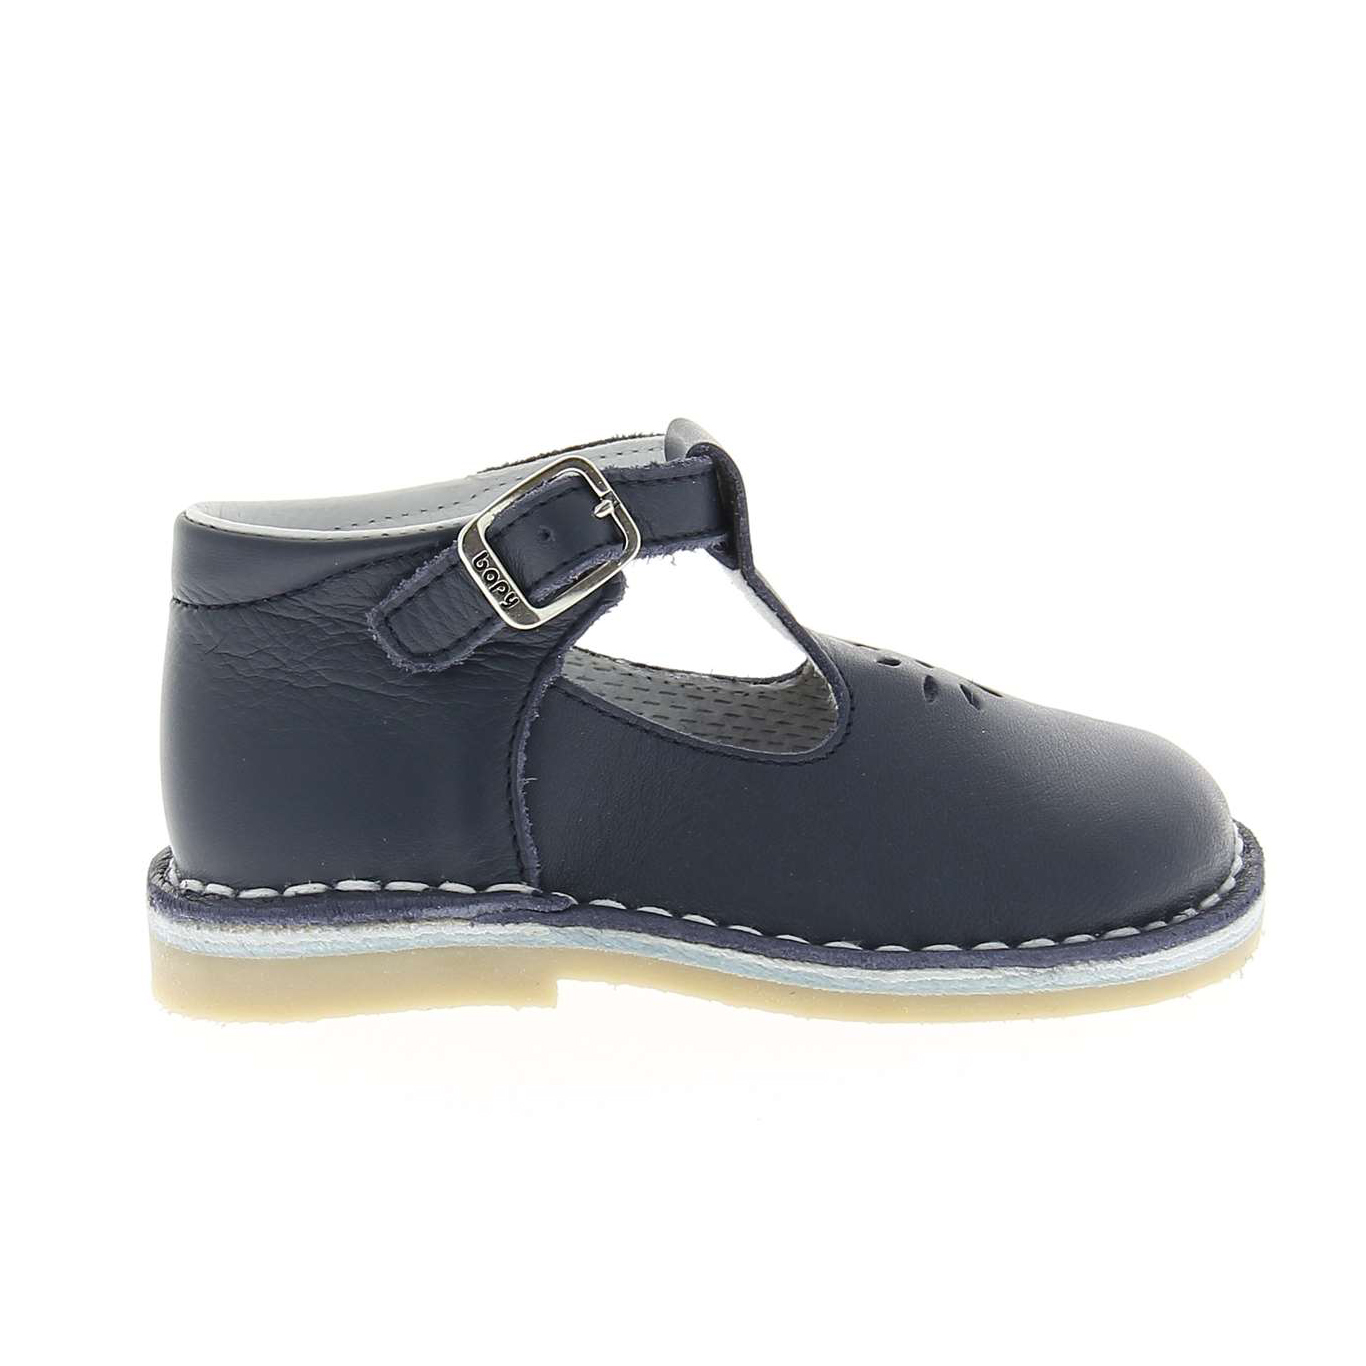 02 - MAPIL - BOPY - Chaussures montantes - Cuir